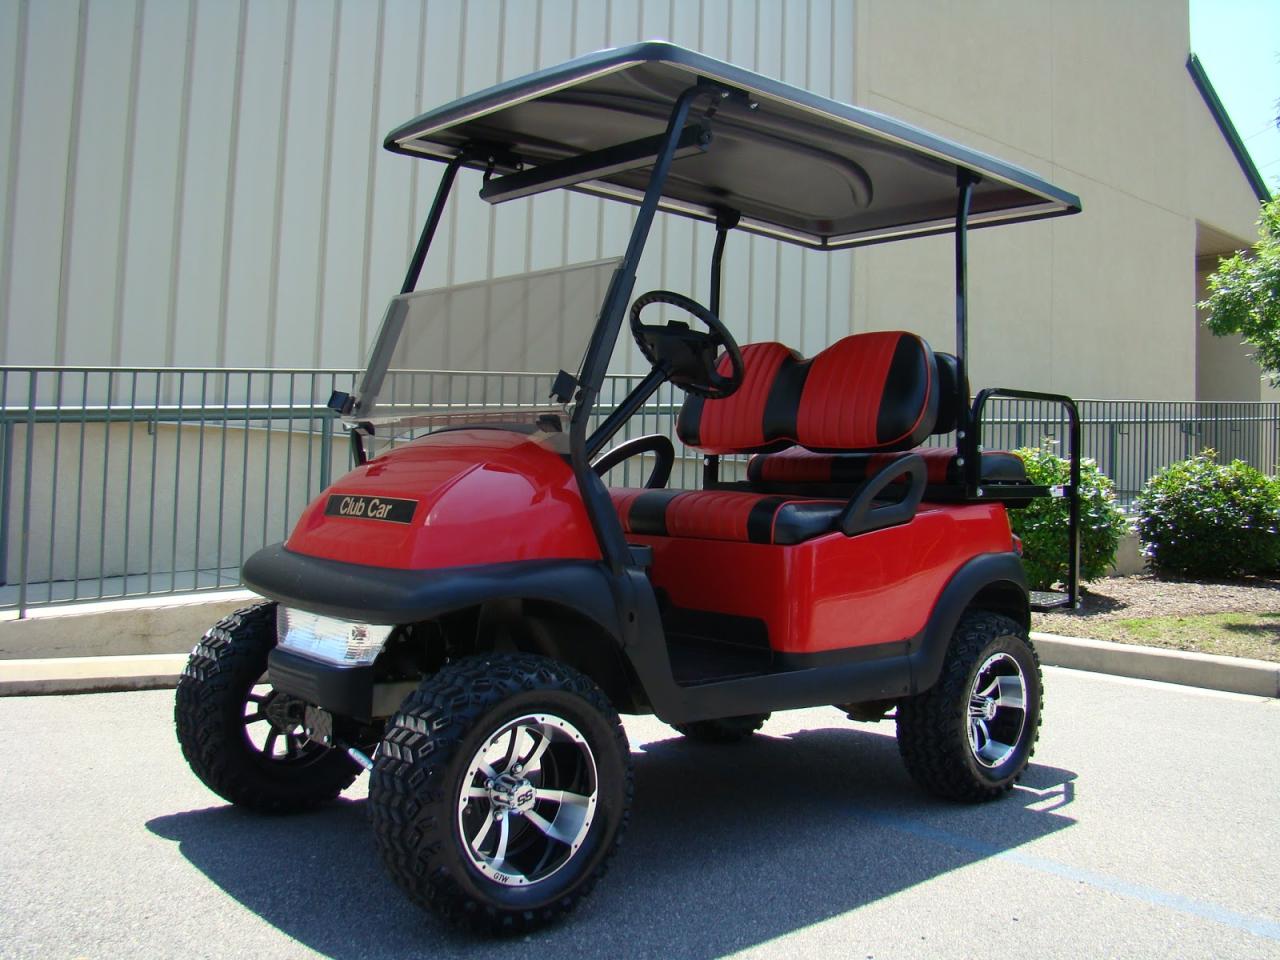 Used Golf Carts for Sale by Owner in Torrance, New Mexico: Find Your Perfect Ride Today!